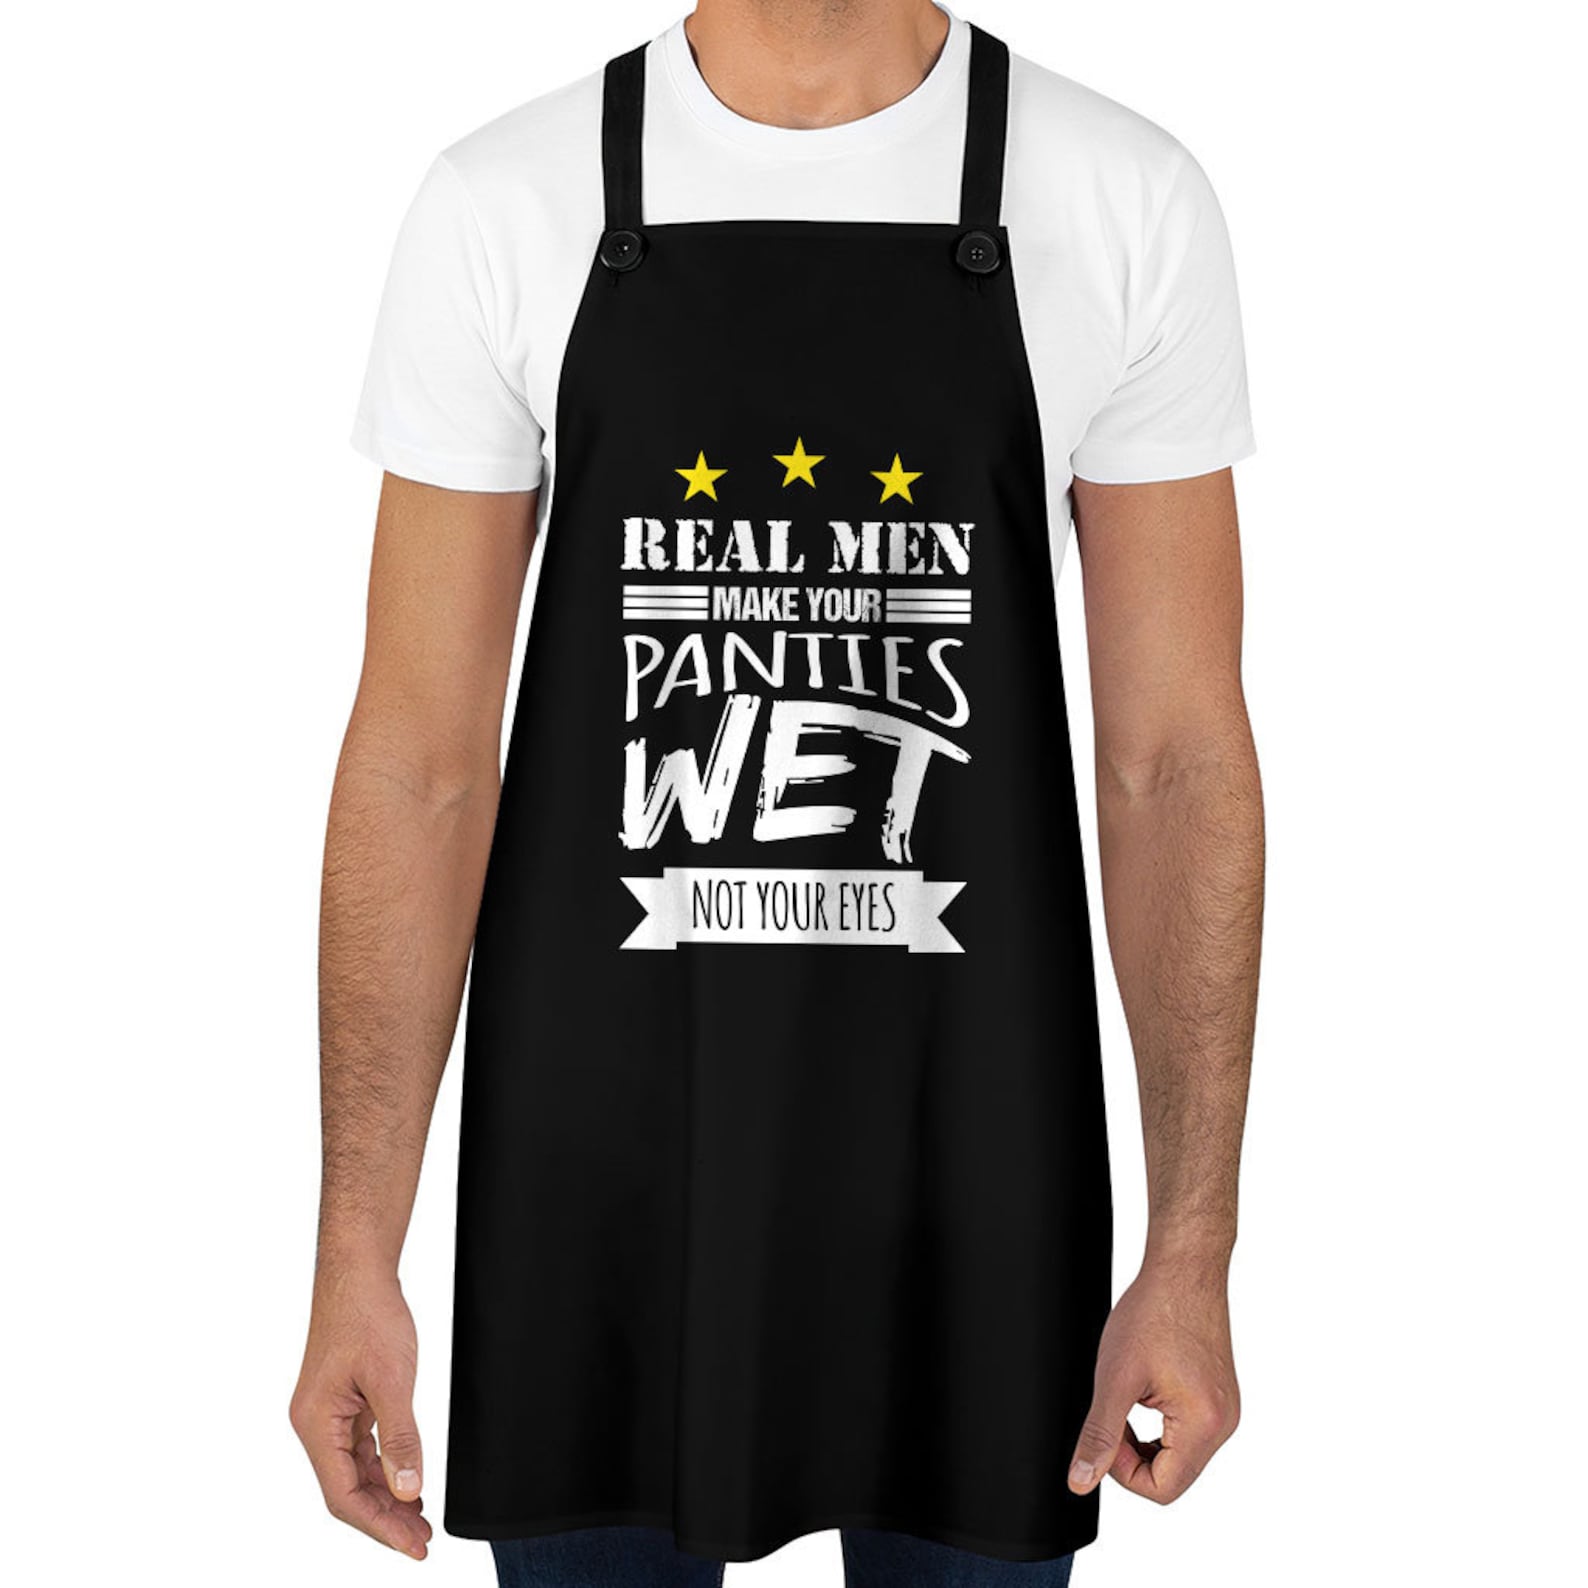 Apron For Men Real Men Apron Apron Hot Sexy Cooking Chef Etsy 